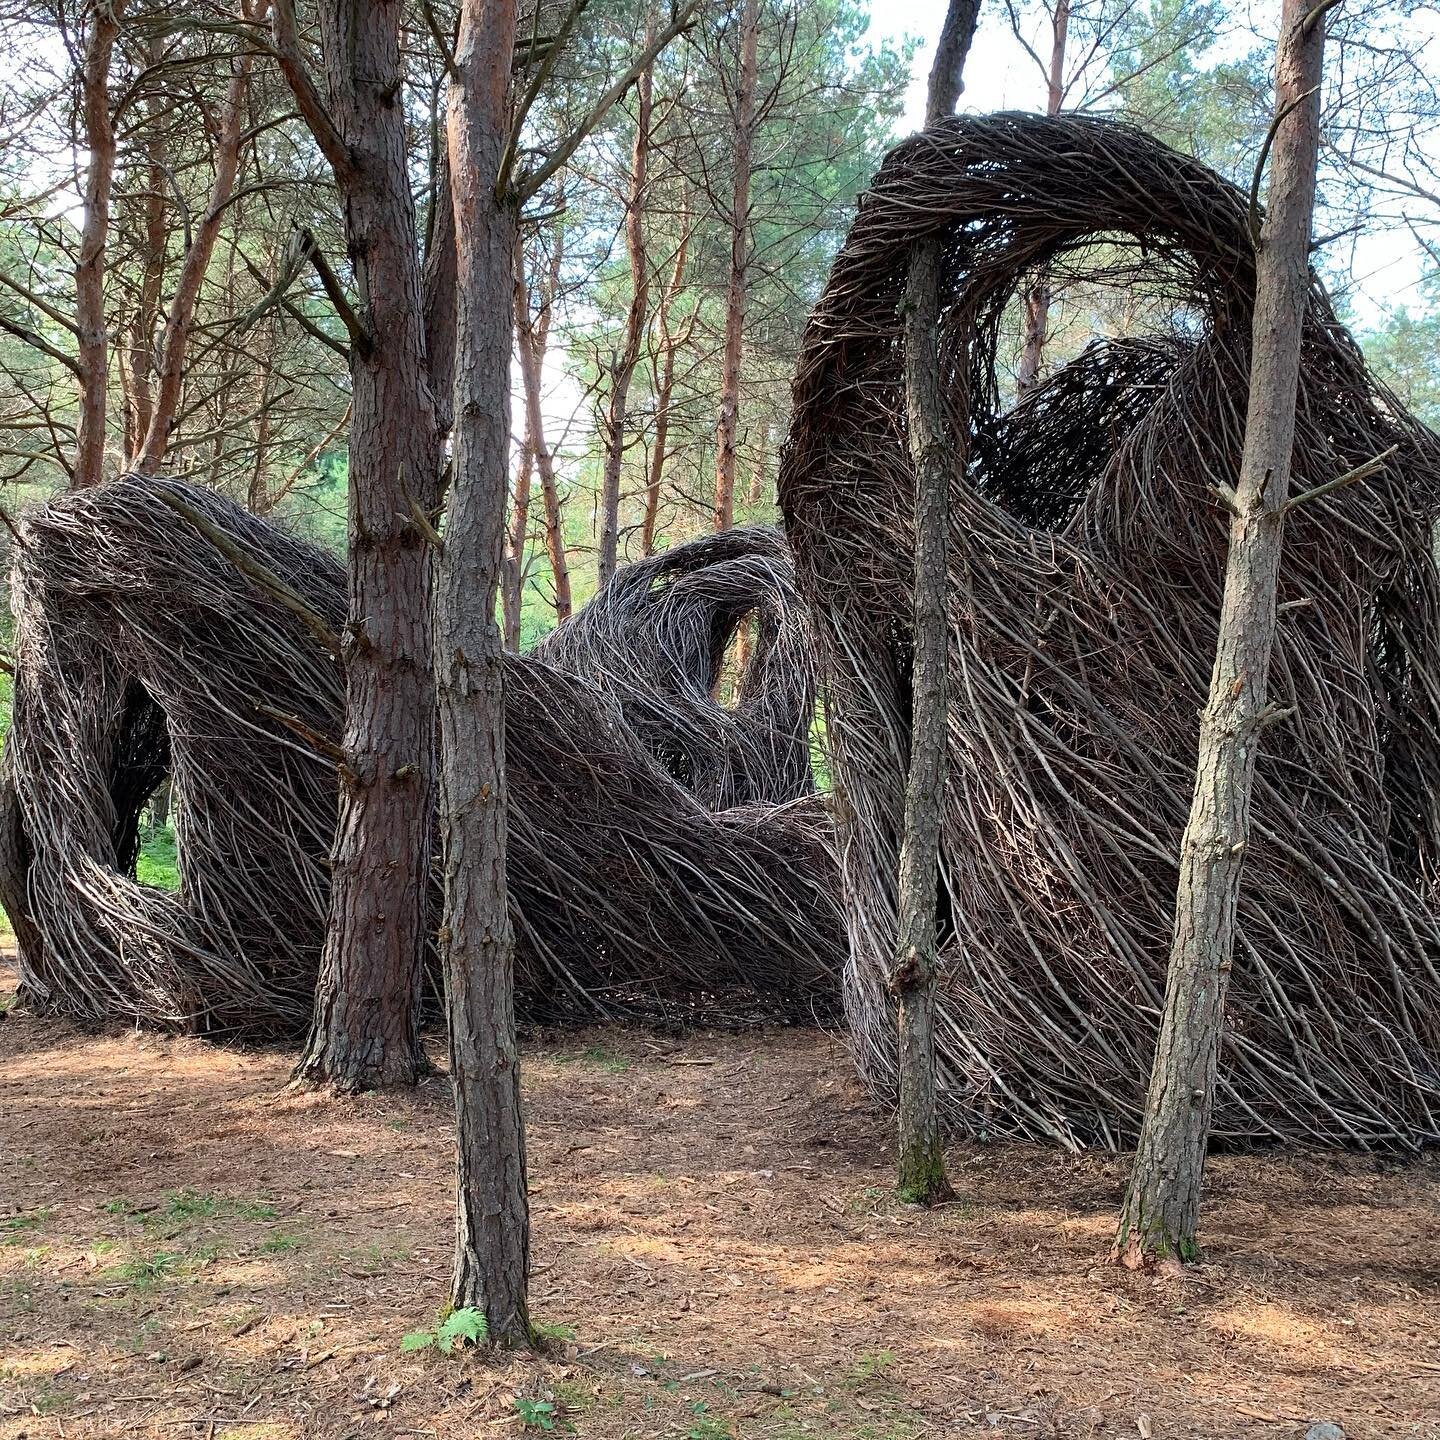 Patrick Dougherty installation at the Wild Center, Tupper Lake, NY
.
.
.
.
.
.
#thewildcenter
#patrickdoughertystickwork 
#patrickdougherty 
#natureinstallation